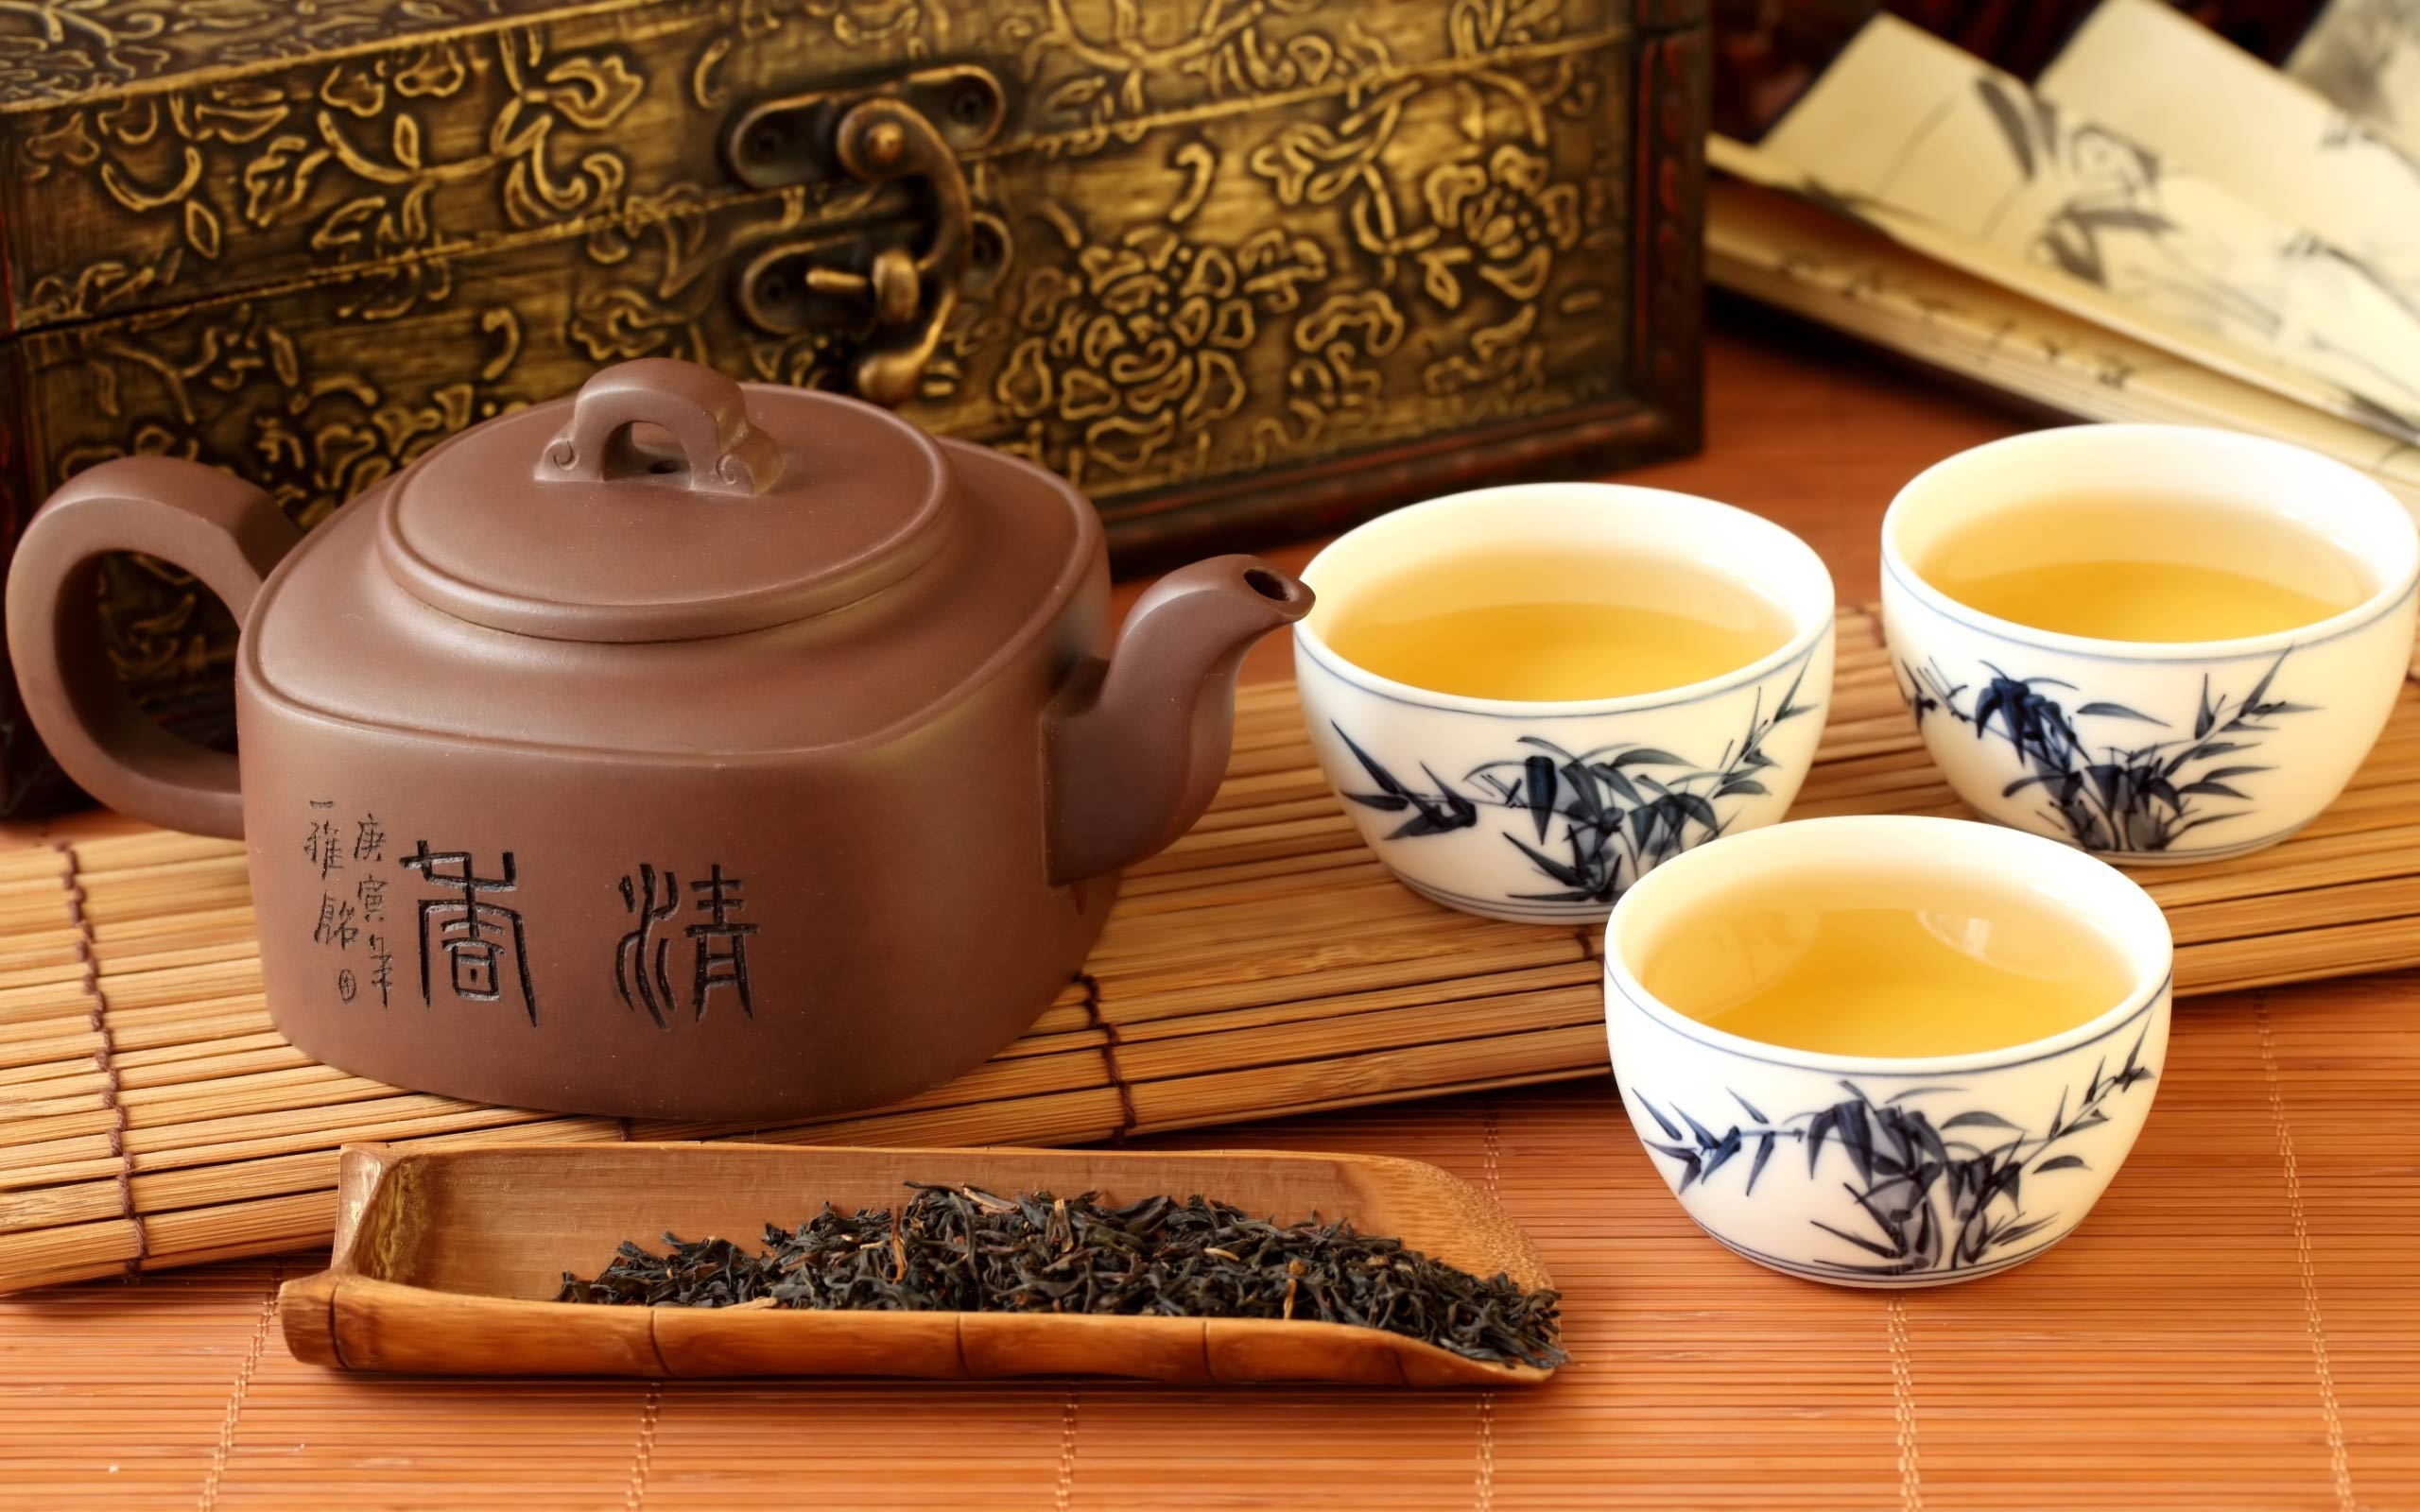 Chinese Traditional Tea – One world, one cup of tea